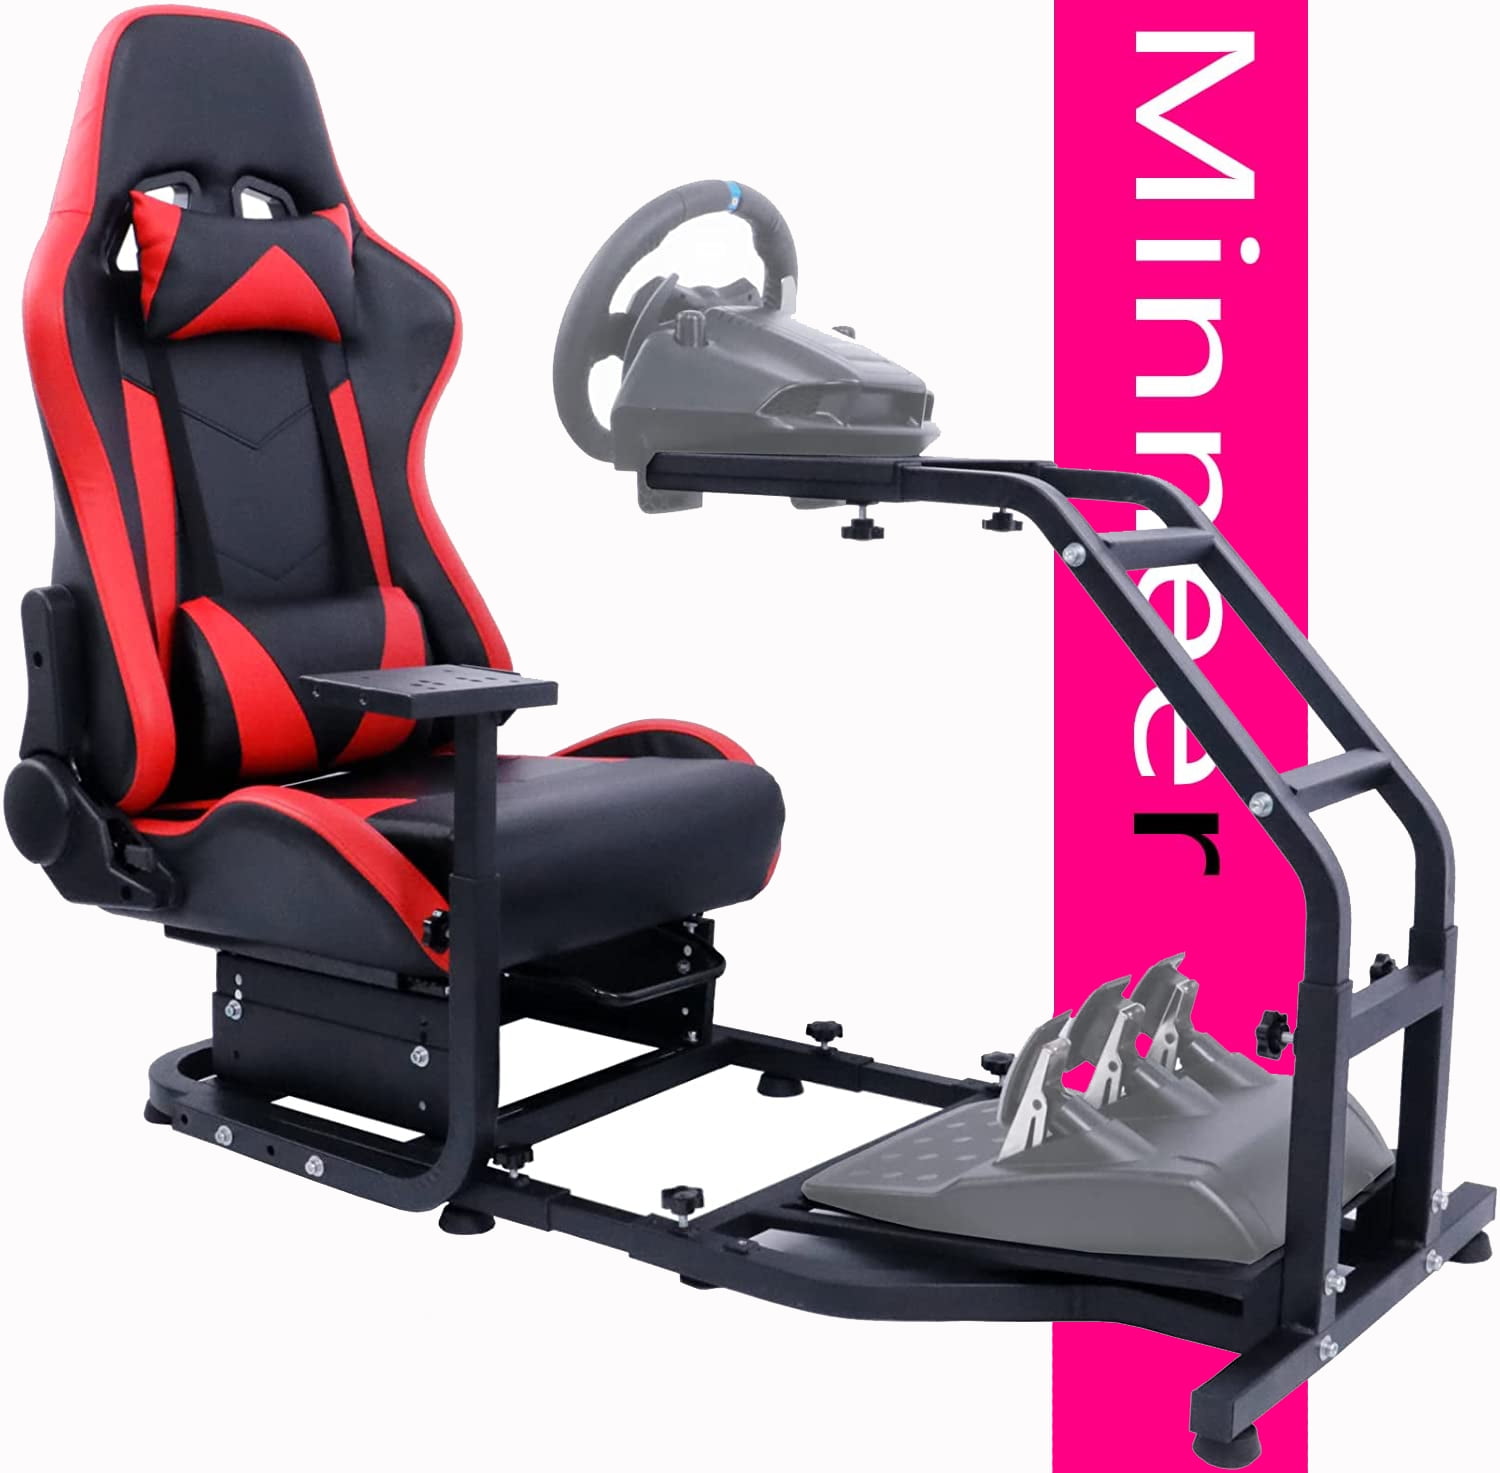 Absoluut afstand Duplicatie Minneer Racing Simulator Cockpit with Racing Seat fit for Logitech  G29,G27,G25, G923 Without Wheel and Pedals - Walmart.com